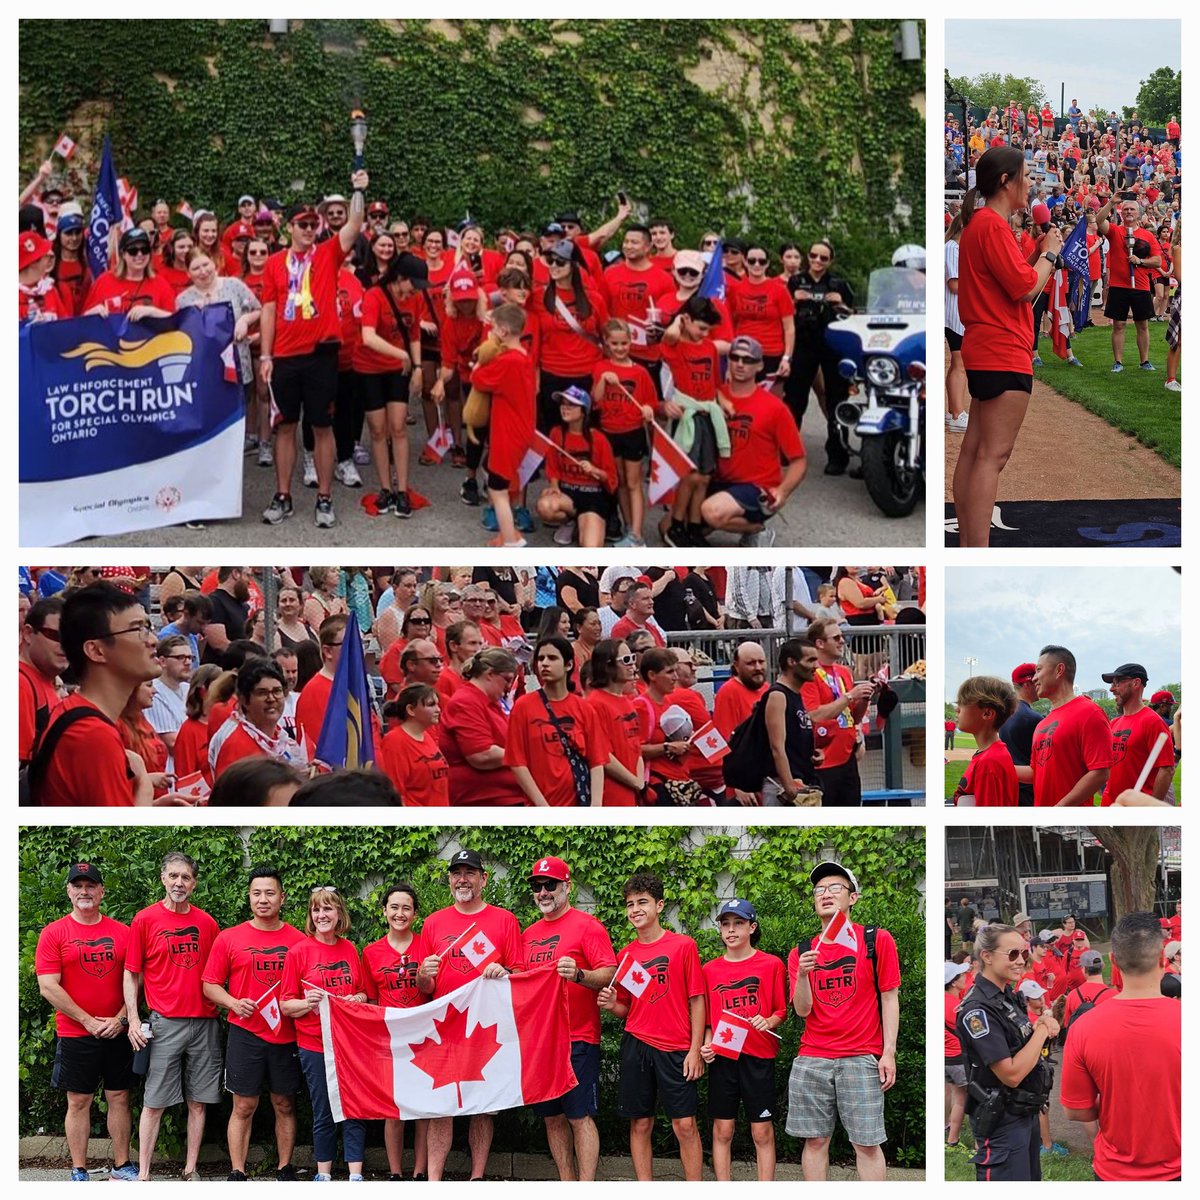 The LETR is not just a fundraiser. It's a day to honour Special Olympic Athletes, promote understanding & inclusion amongst people with & without intellectual disabilities. Thank you to all participants, parents, volunteers, supporters & members from LPS. You have changed lives.